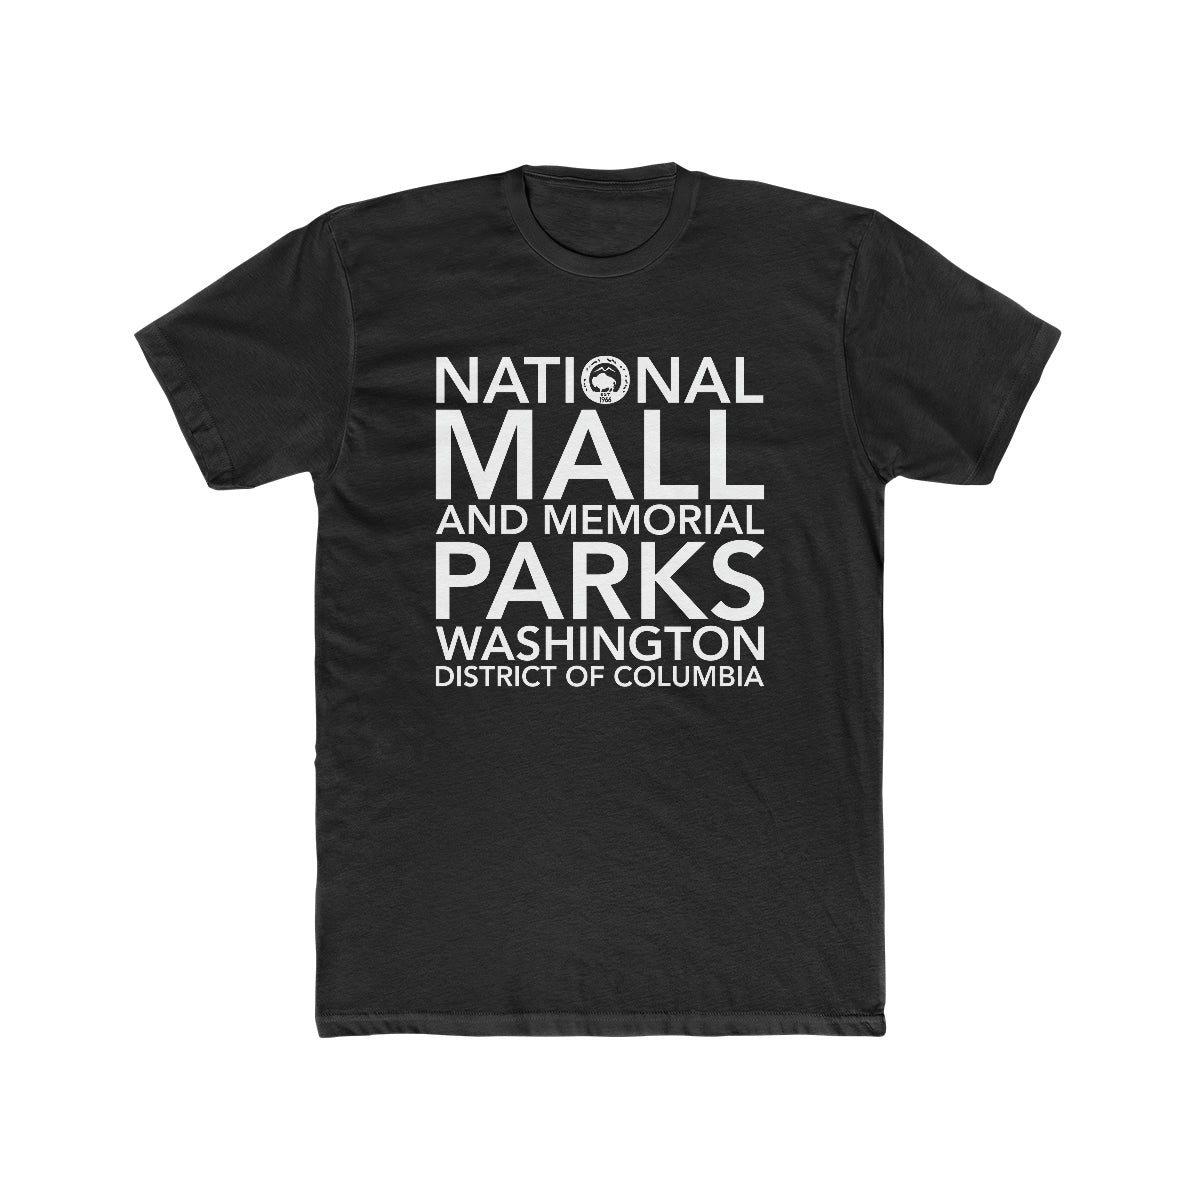 National Mall and Memorial Parks T-Shirt Block Text